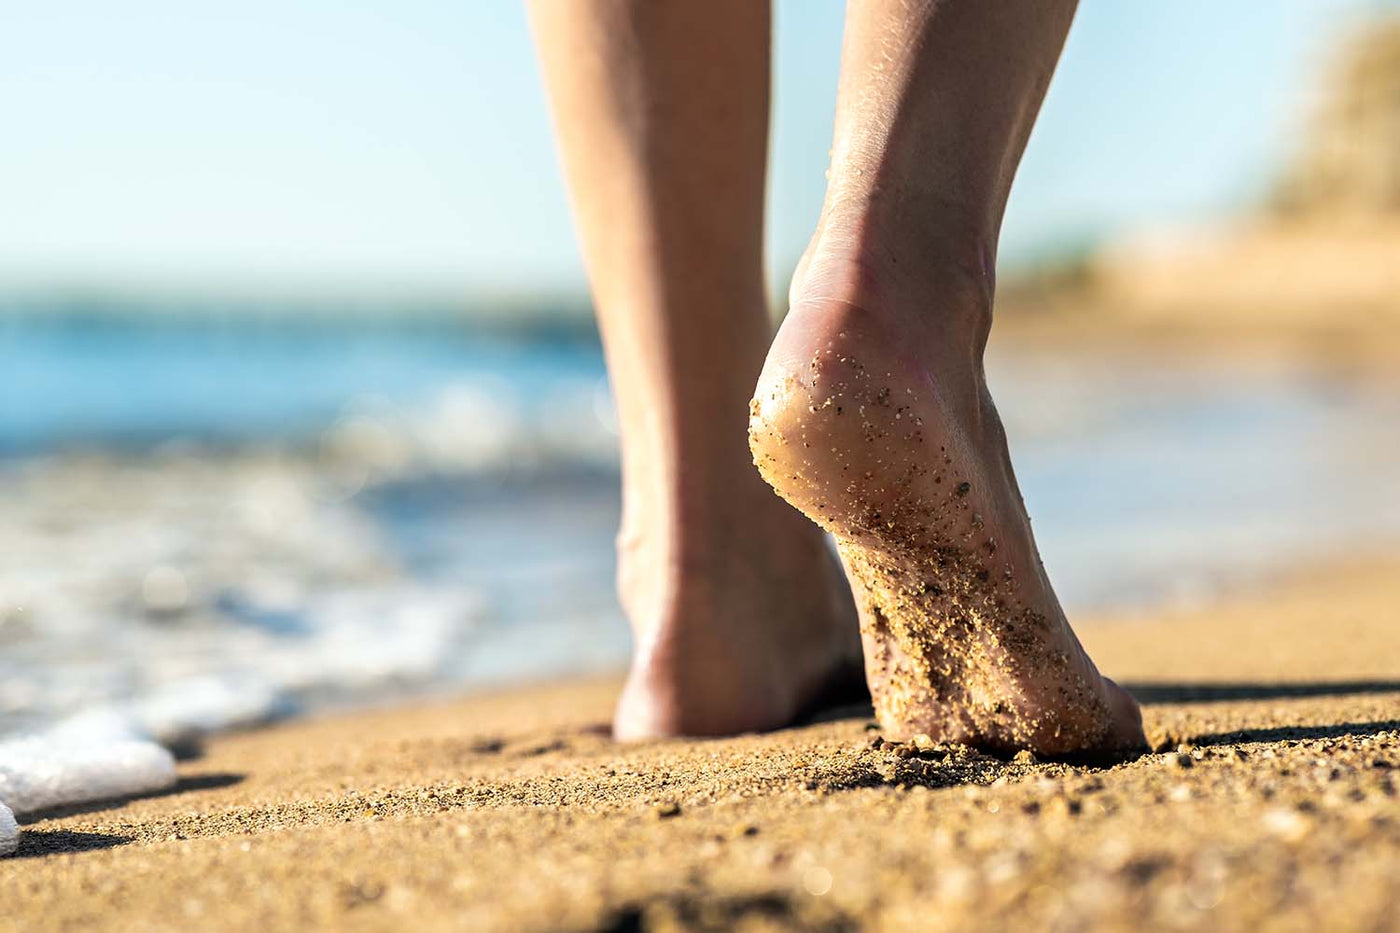 The art of walking barefoot, and connecting to nature